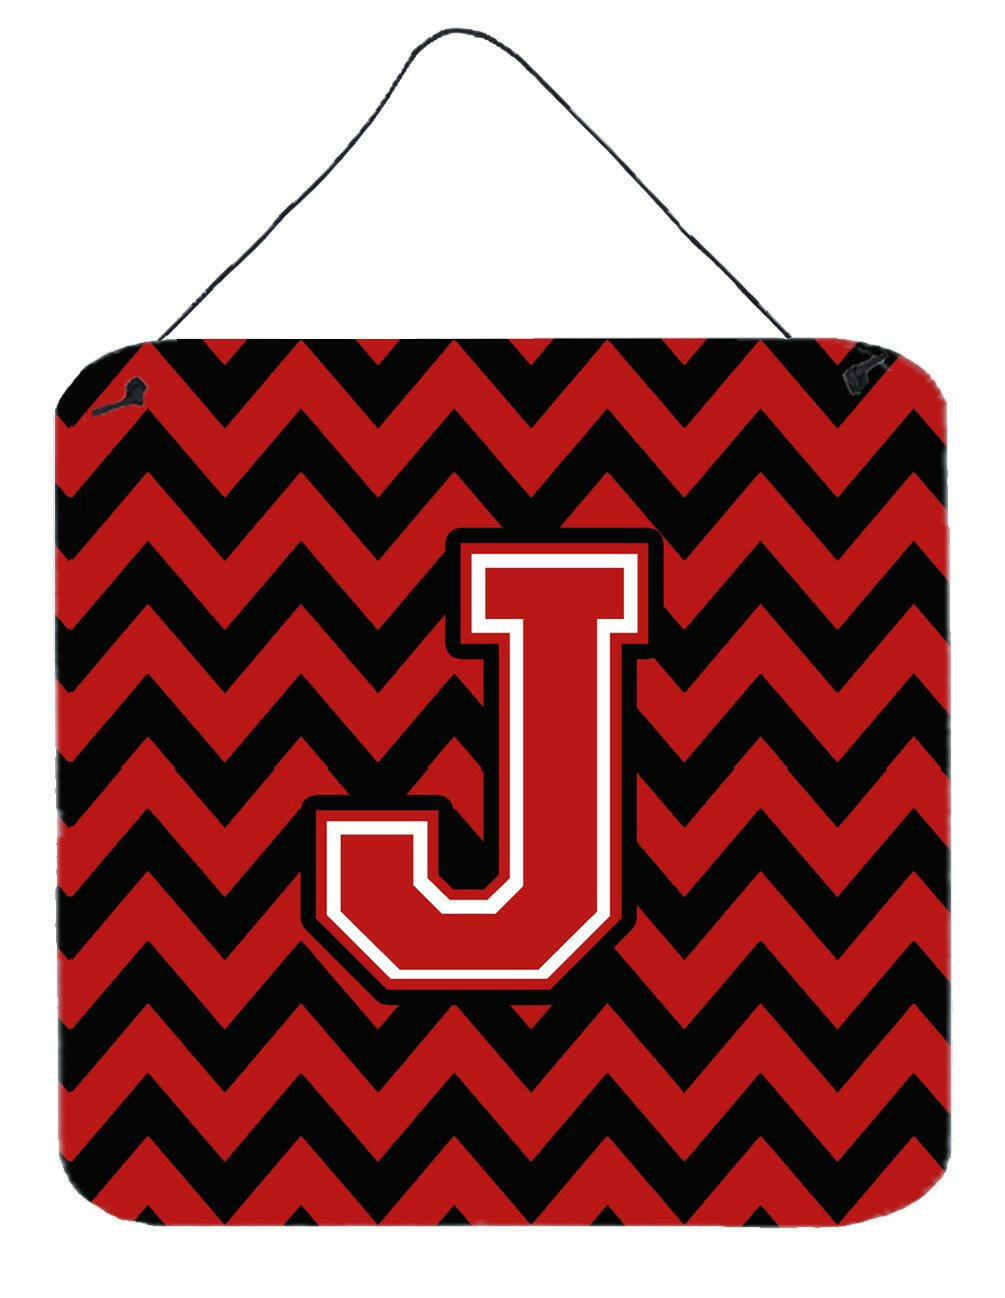 Letter J Chevron Black and Red   Wall or Door Hanging Prints CJ1047-JDS66 by Caroline's Treasures